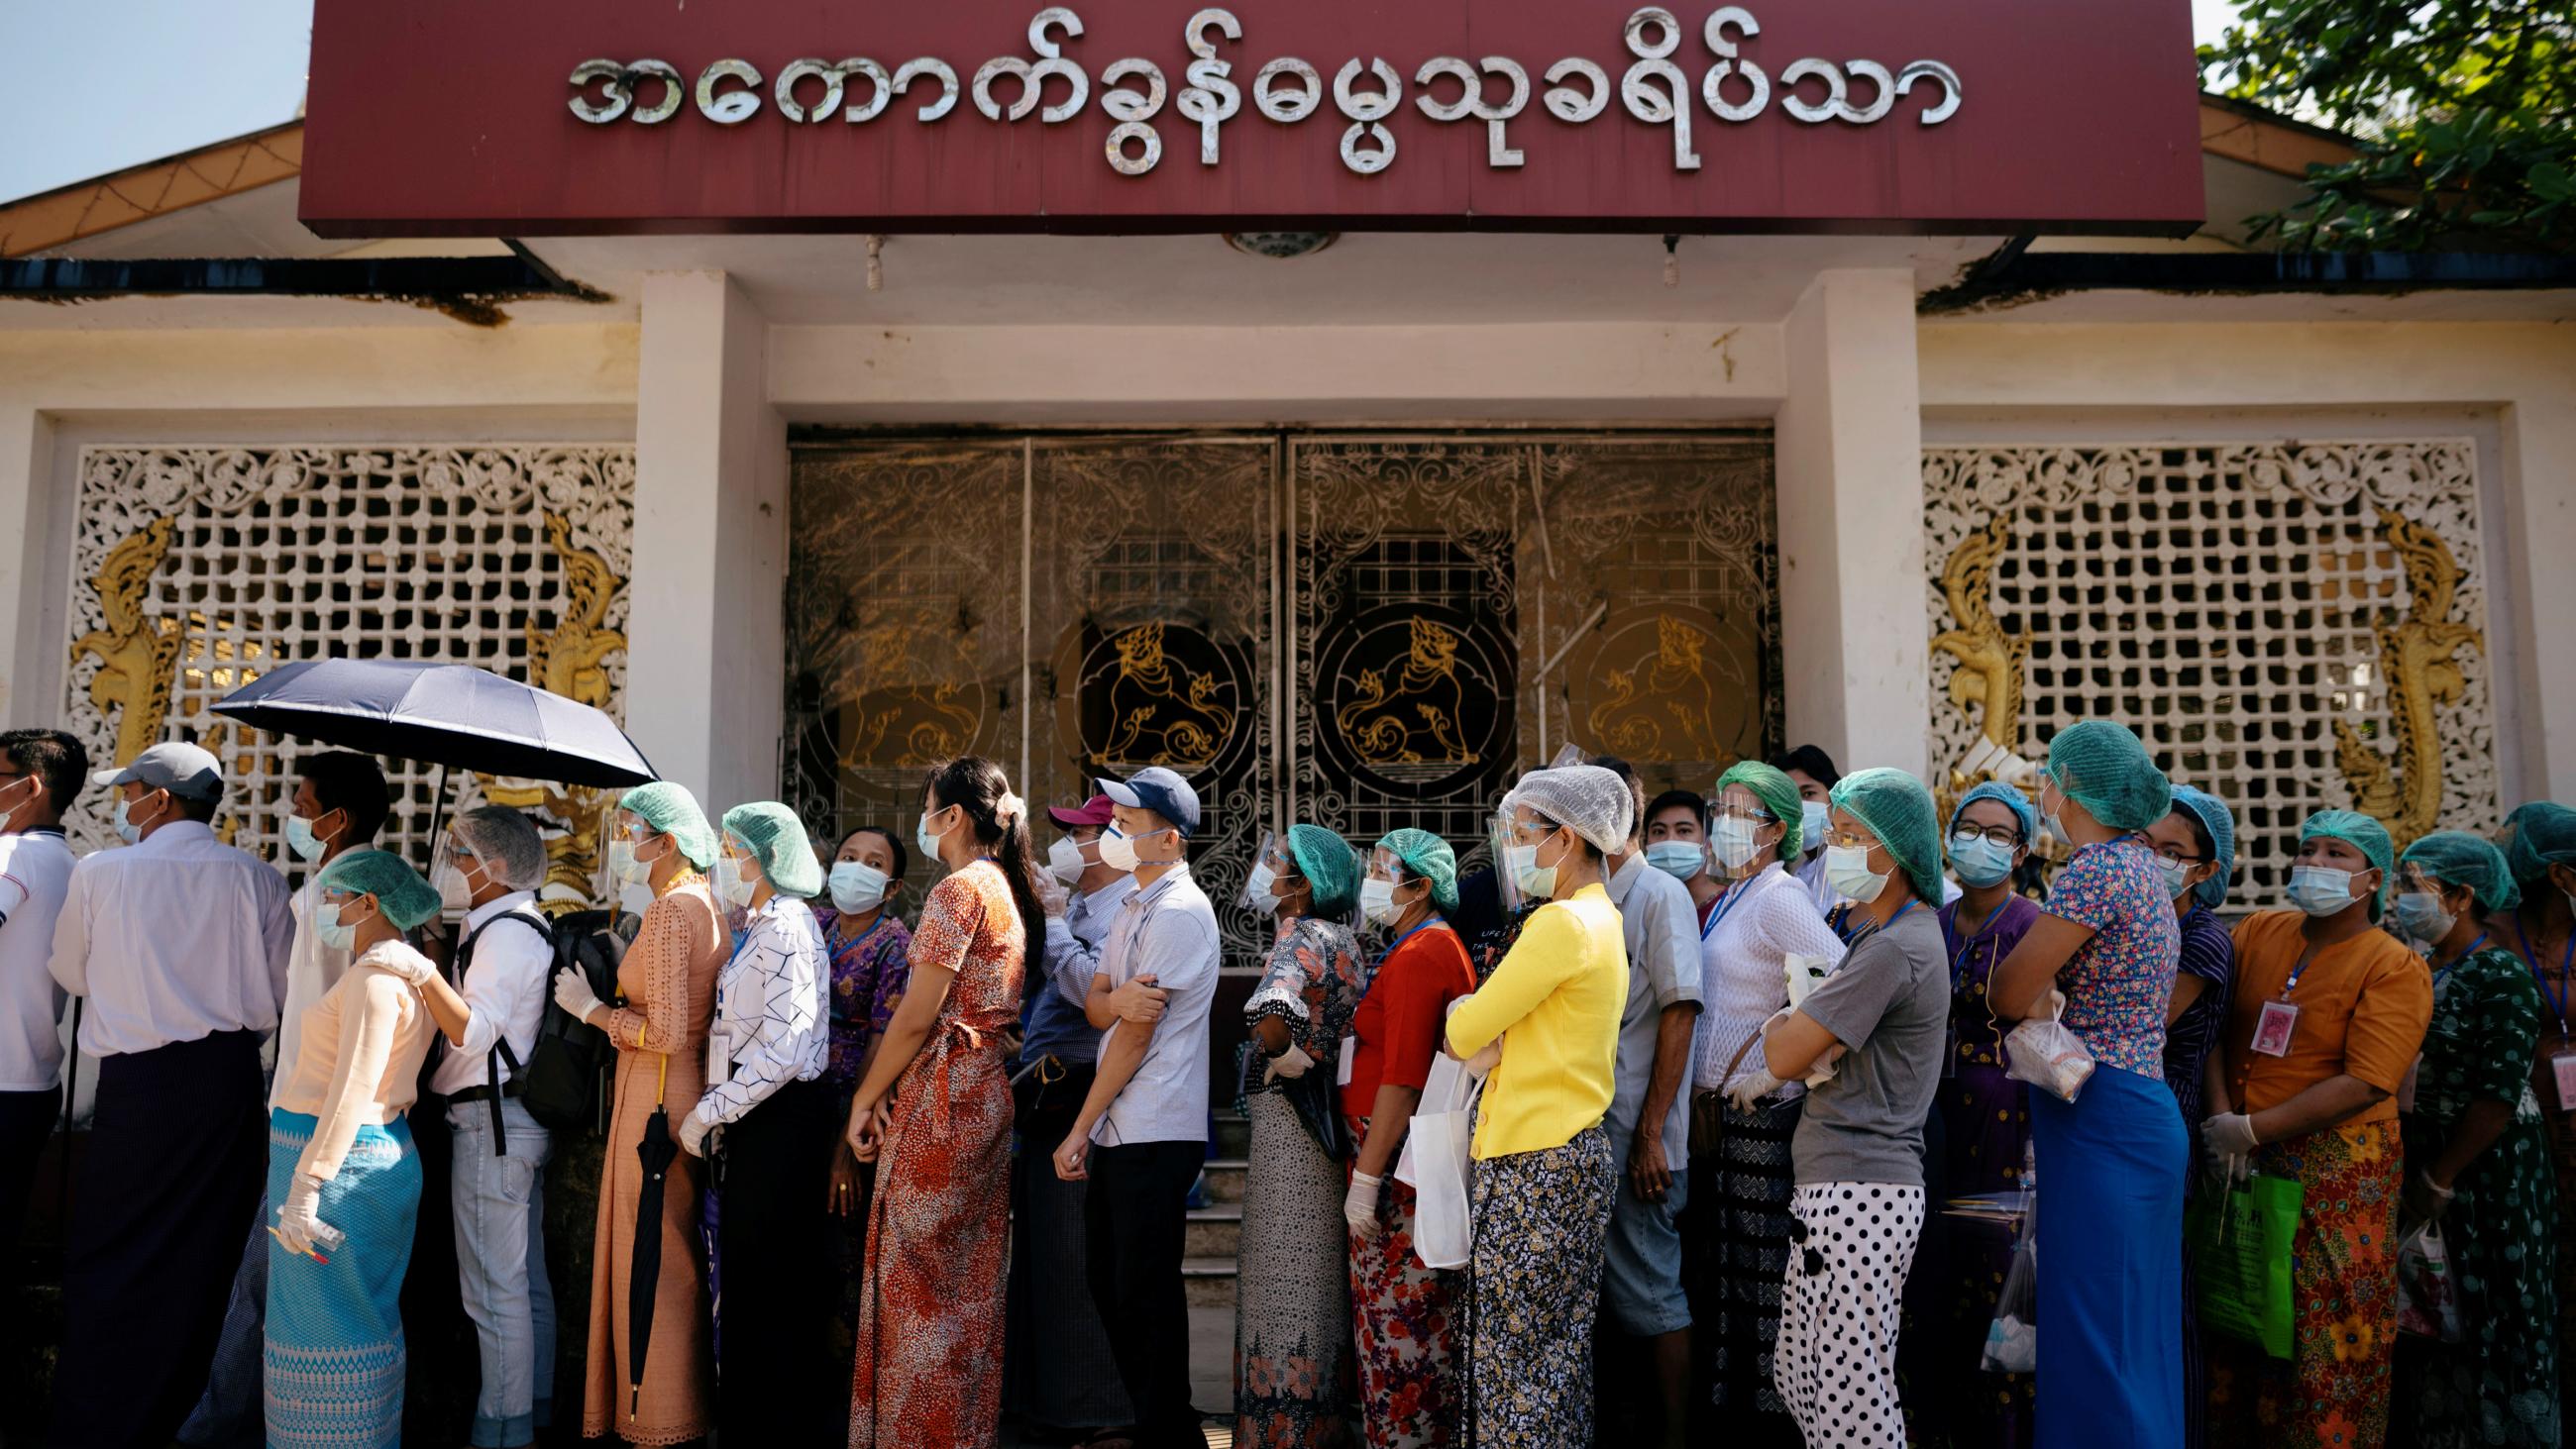 People wearing protective masks stand in line, closely together, waiting to cast their ballots for the general election at a polling station in Yangon, Myanmar on November 8, 2020.